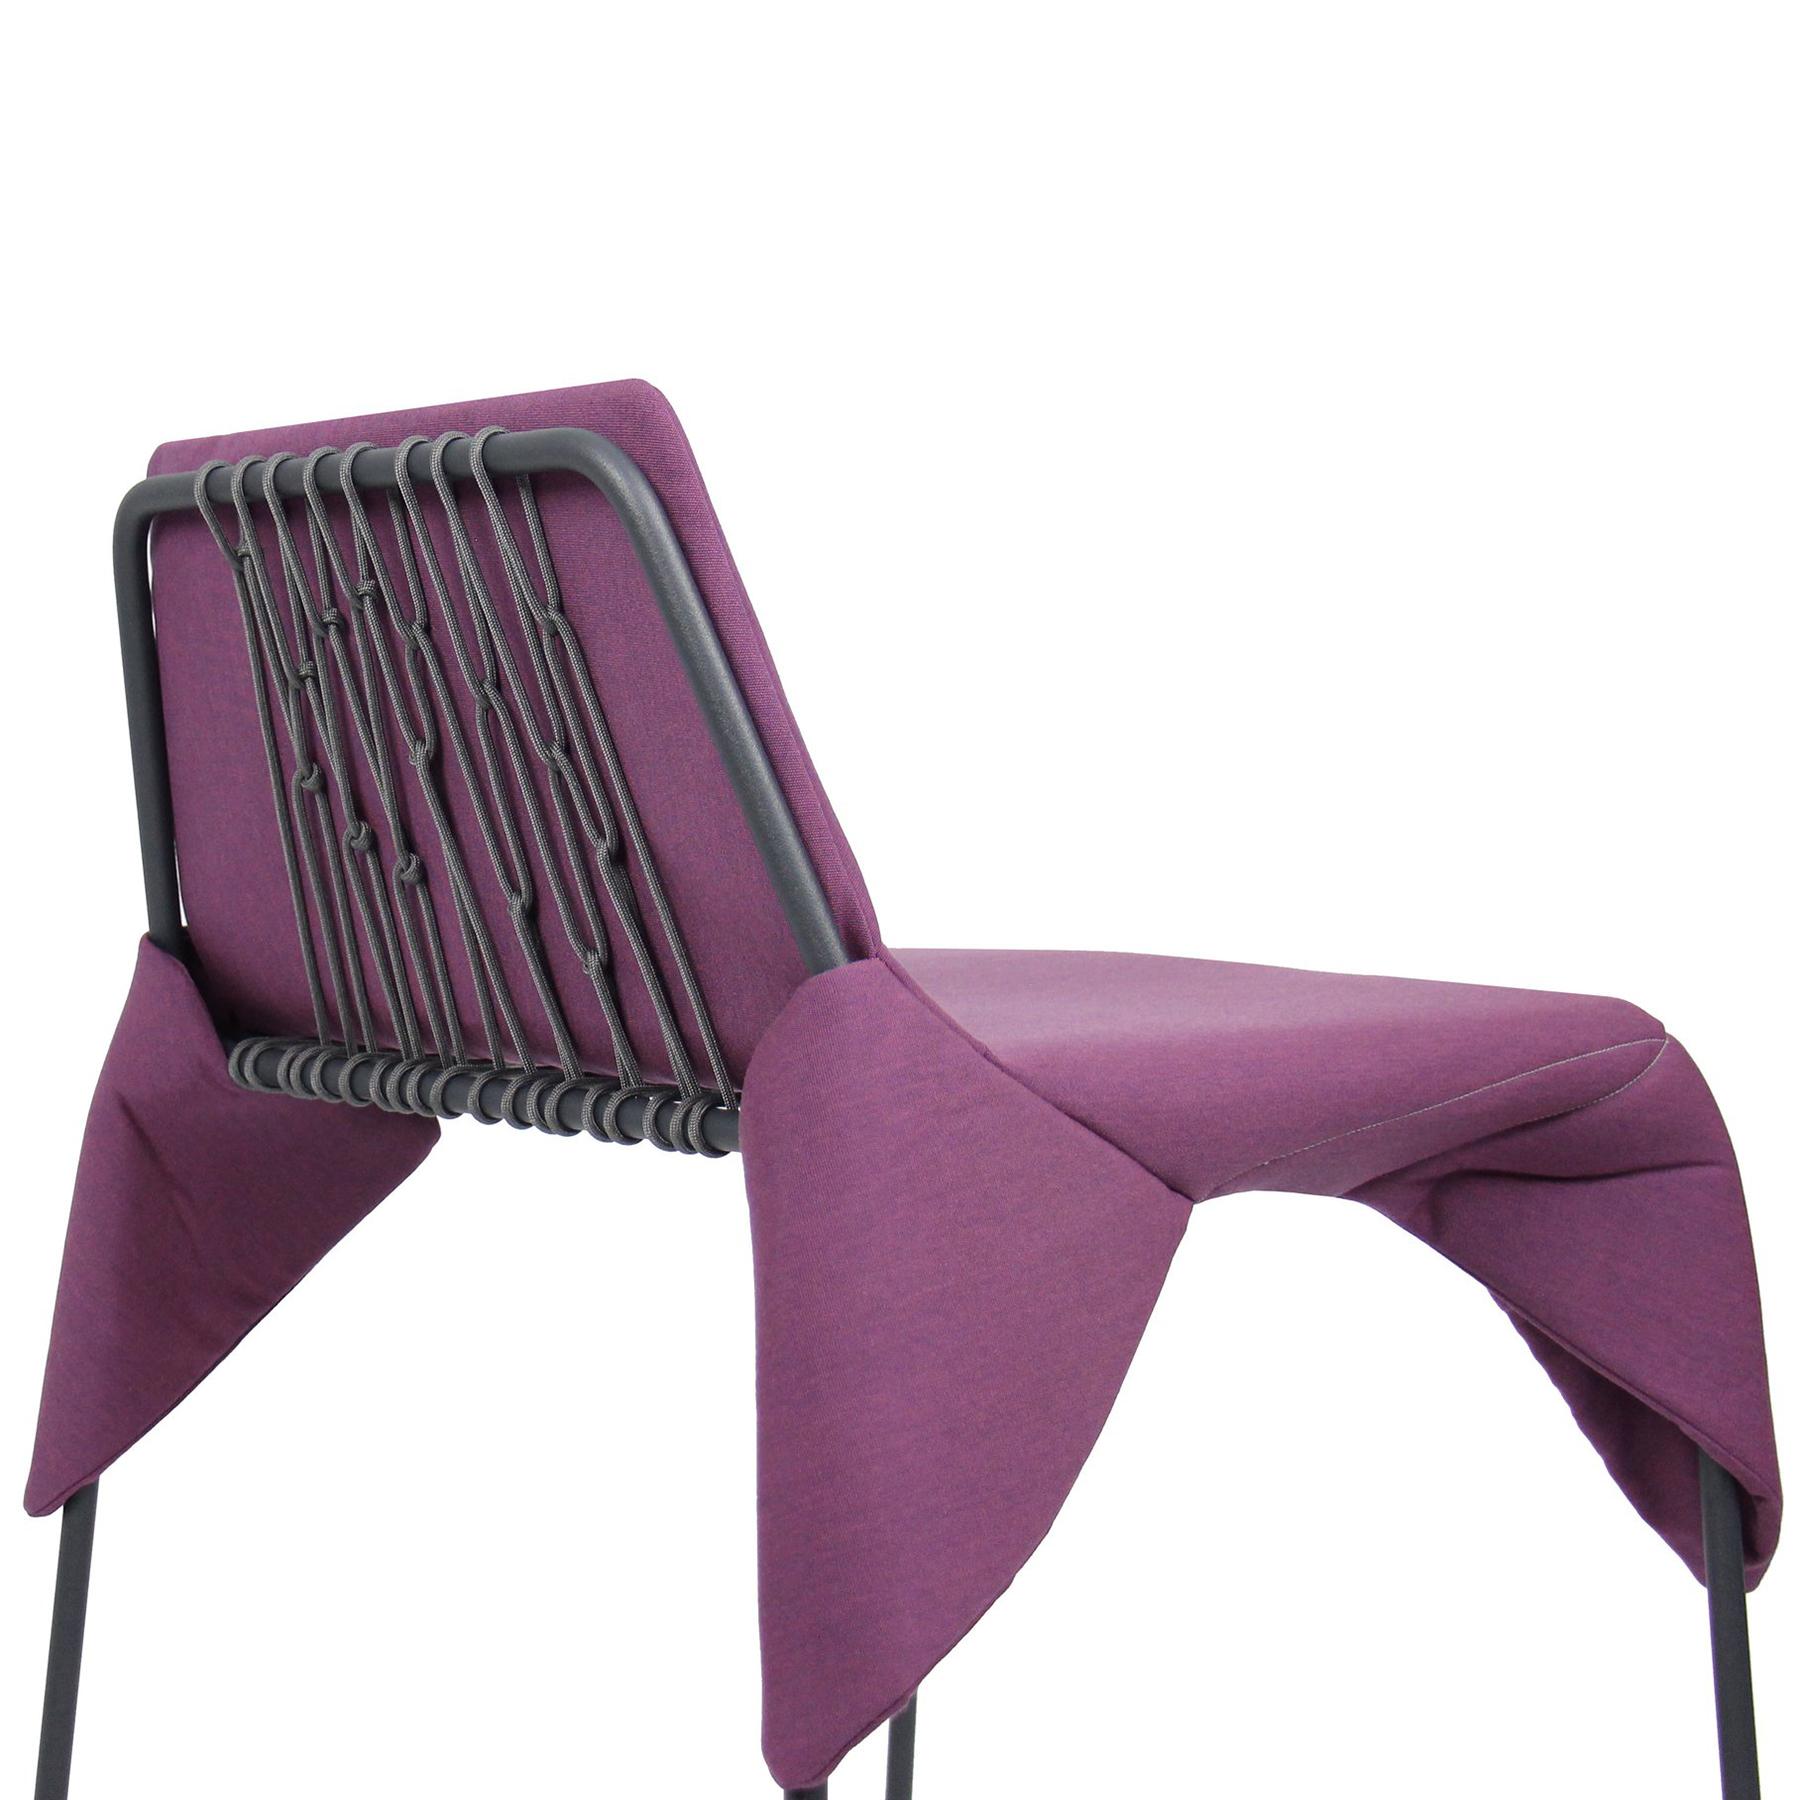 The Merkled Net Wrap Chair features a minimal welded steel frame wrapped with knotted nylon cord and an upholstered removable cushion made from durable outdoor Sunbrella fabric, creating a flexible and comfortable seat. 

Designed and Made in